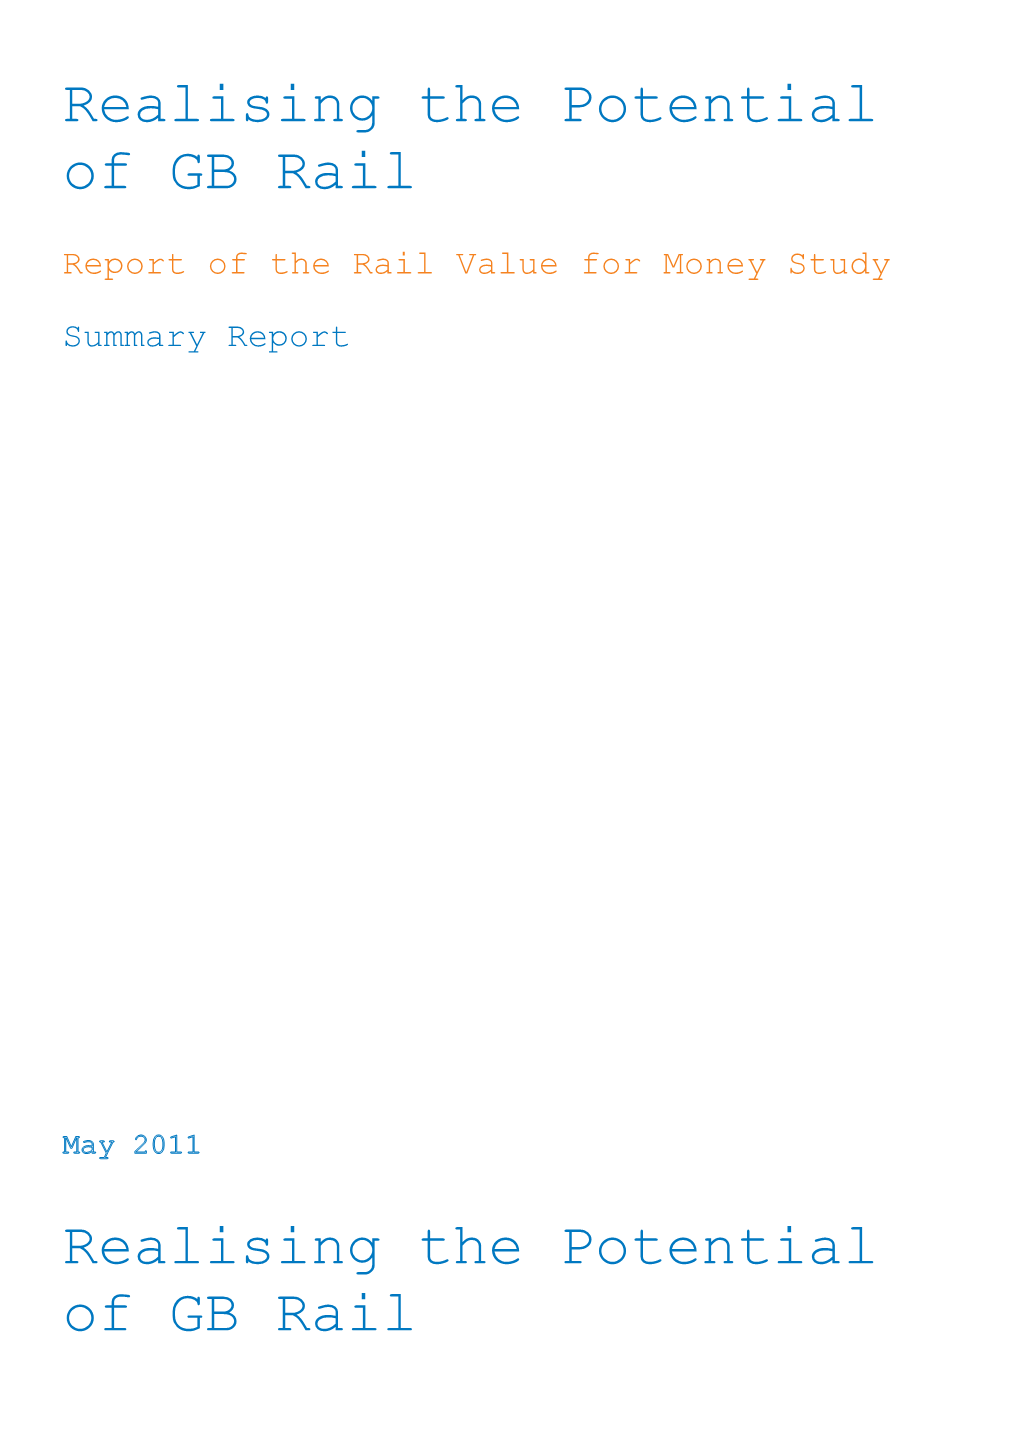 Realising the Potential of GB Rail - Report of the Rail Value for Money Study - Summary Report